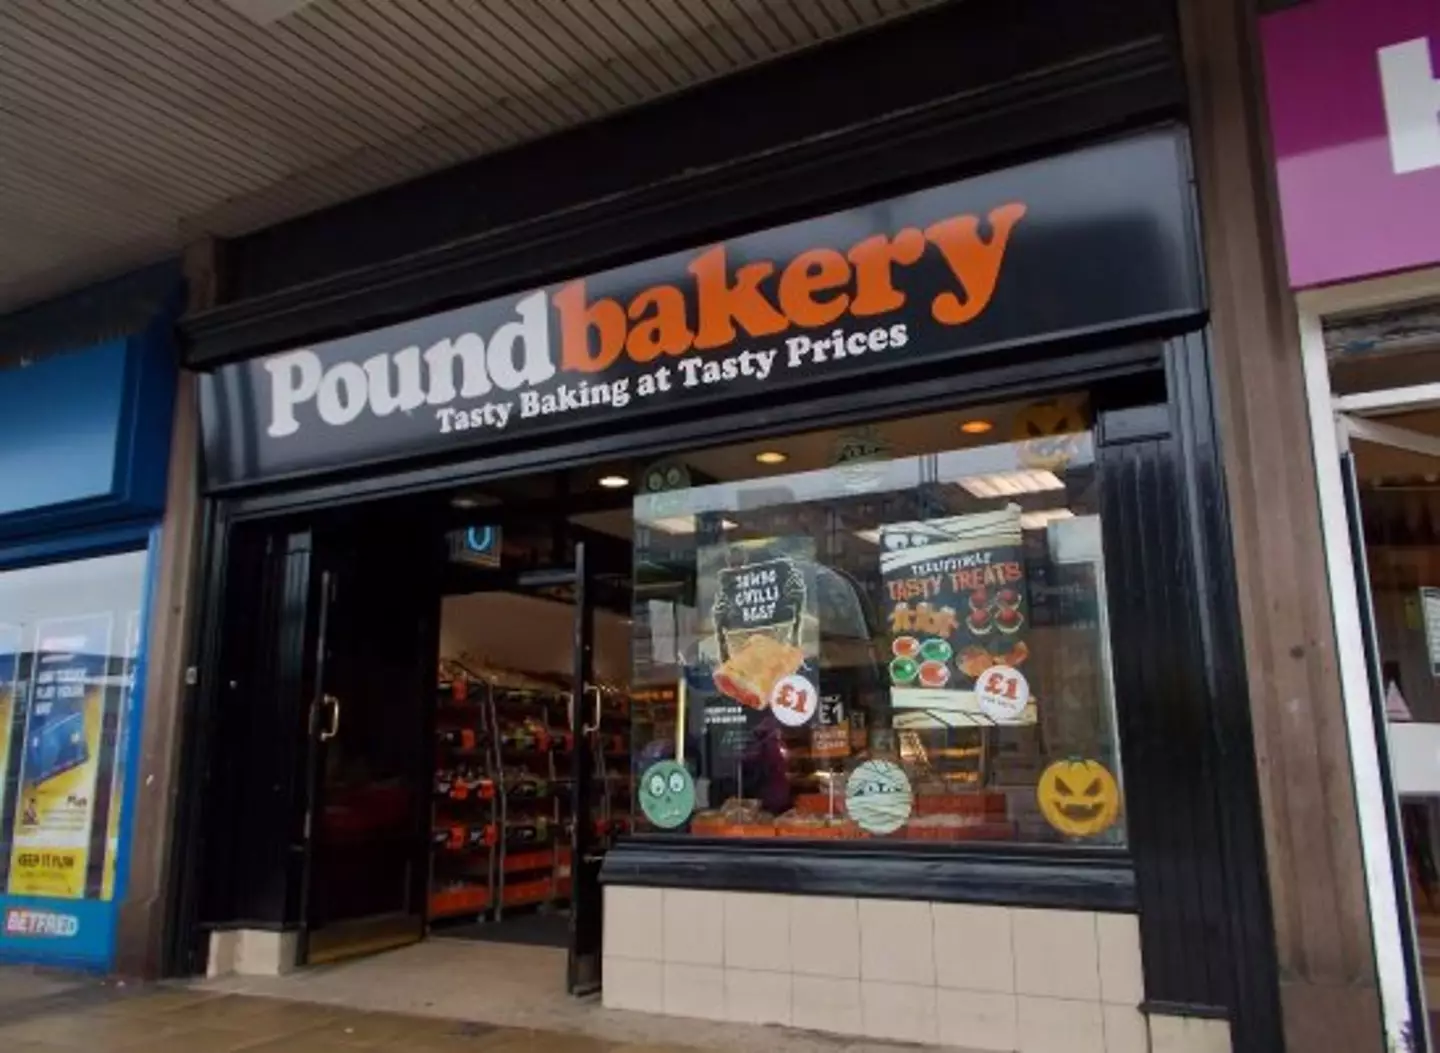 Poundbakery started in Bolton, but now has 100 stores.